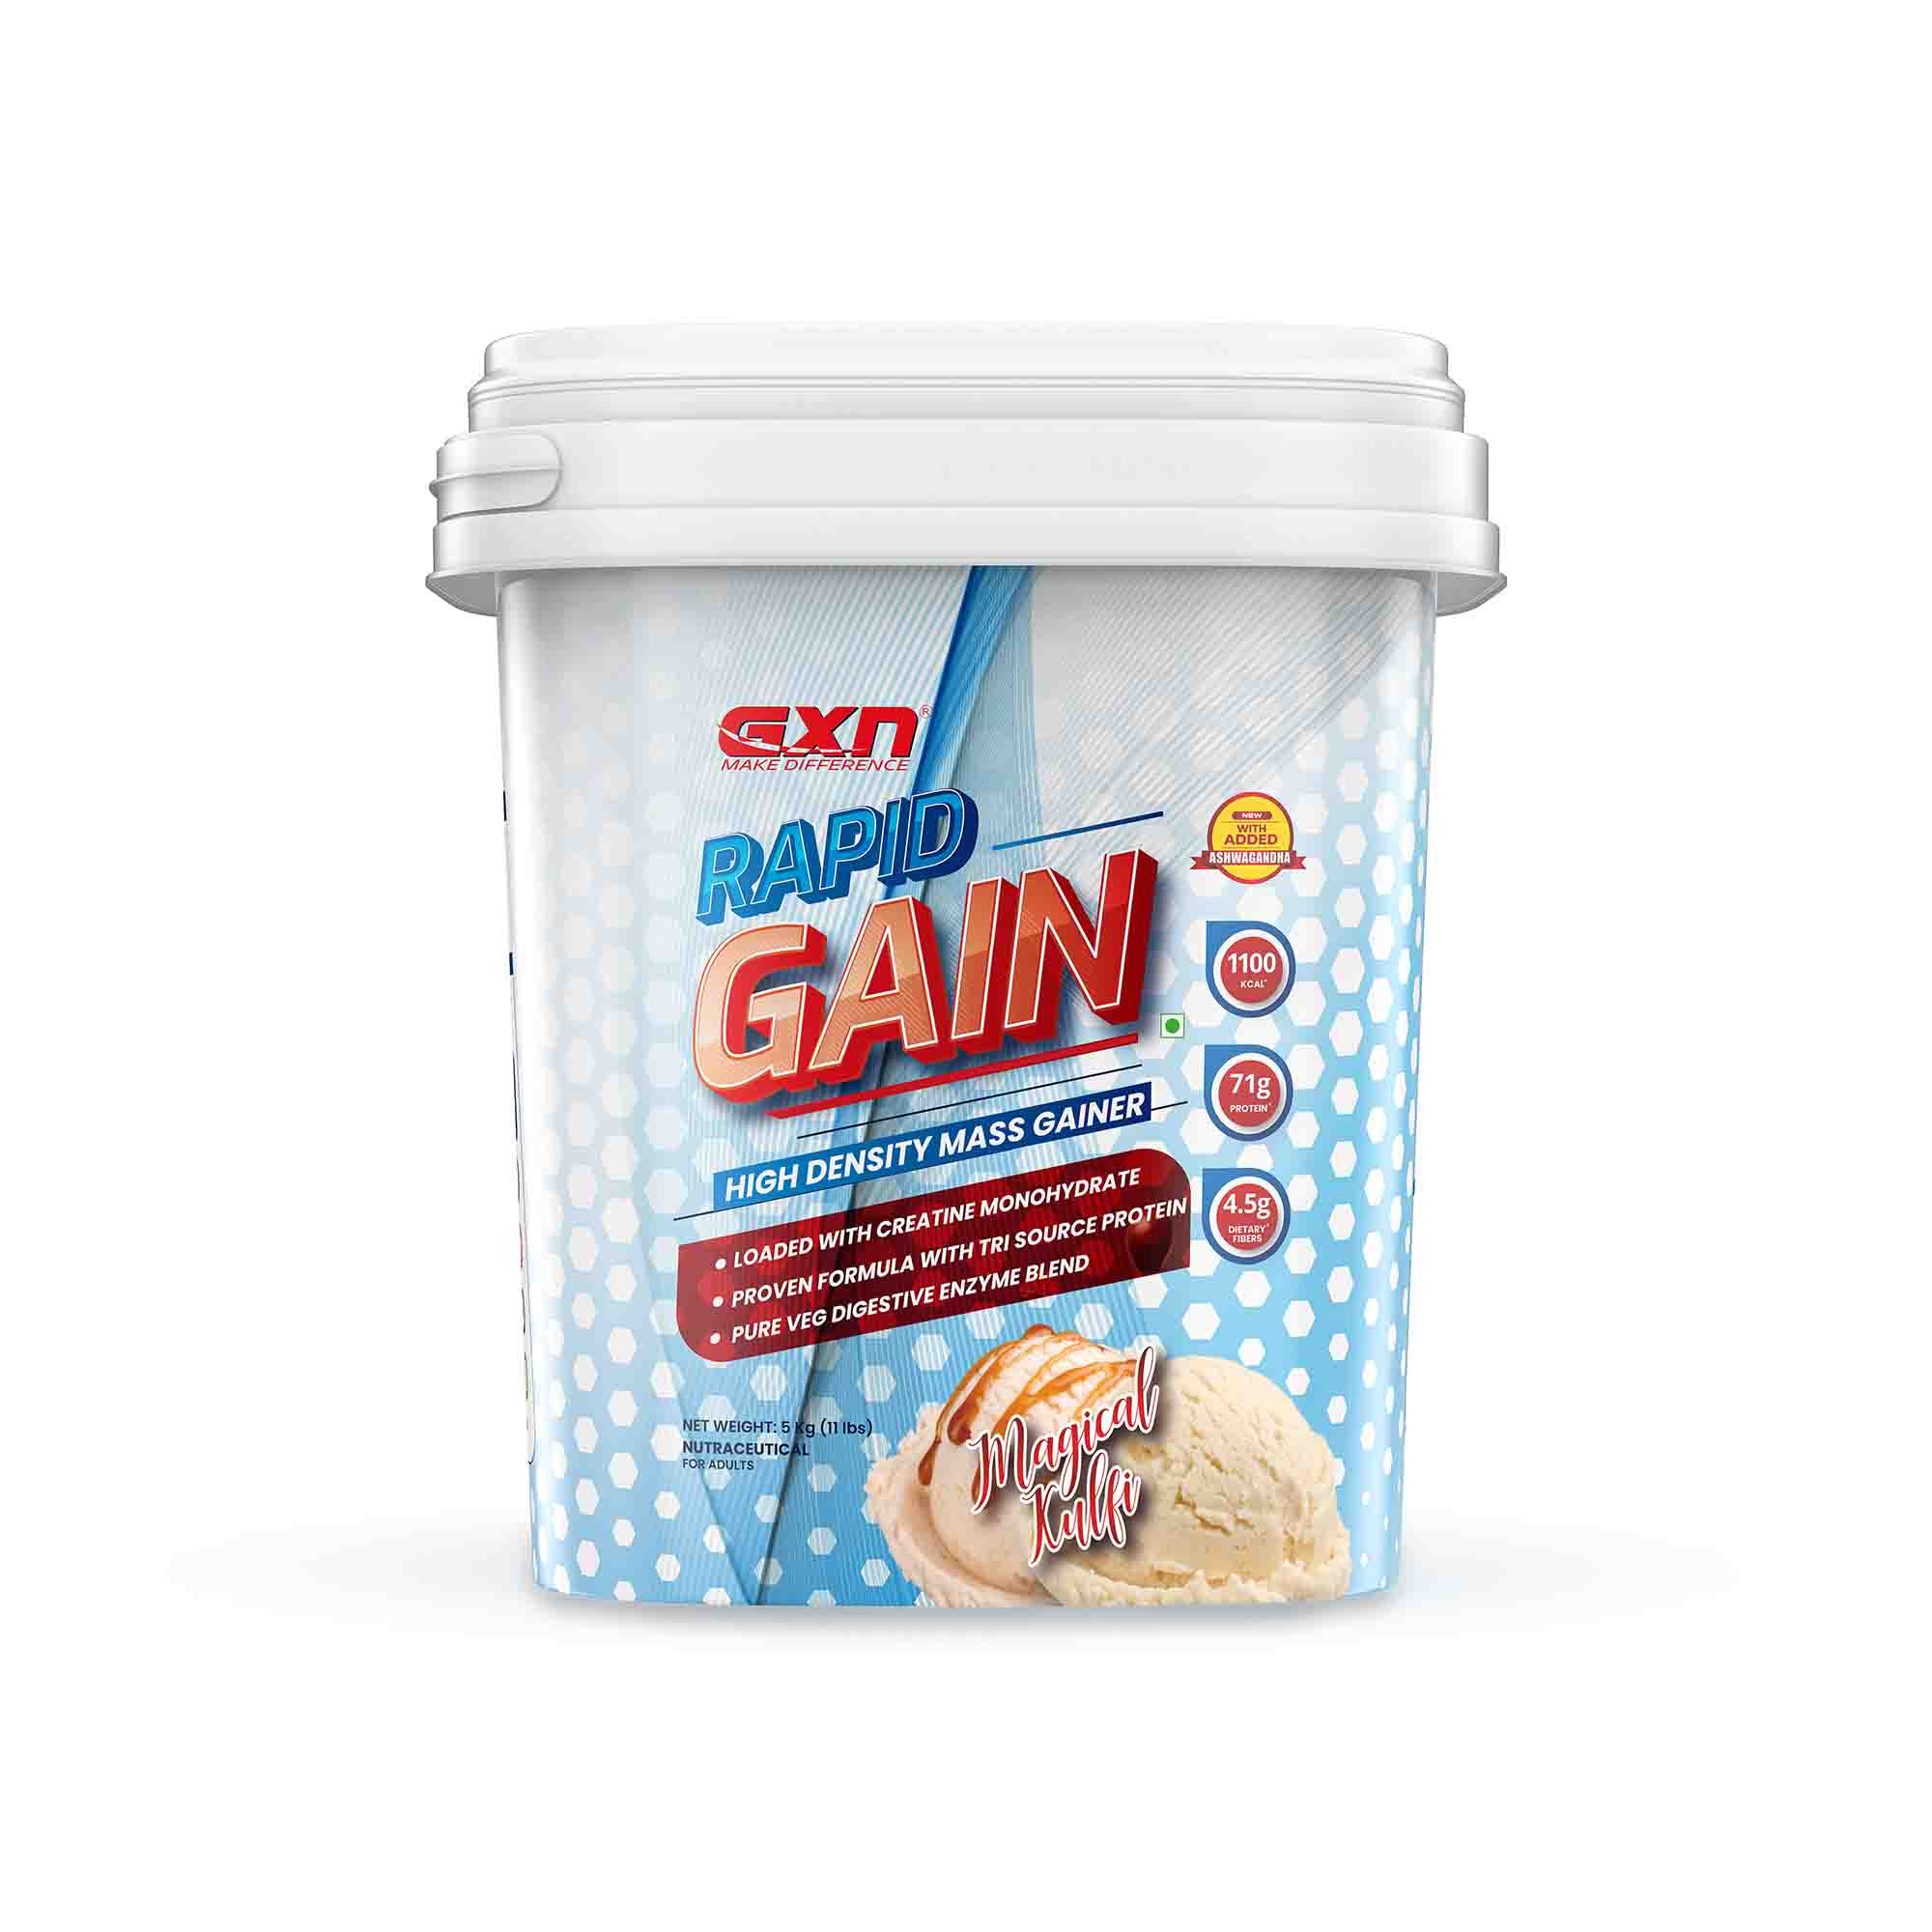 GXN Gainer Powerpacked Nutrition for Superior Muscle Growt - Haryana - Gurgaon ID1522237 3